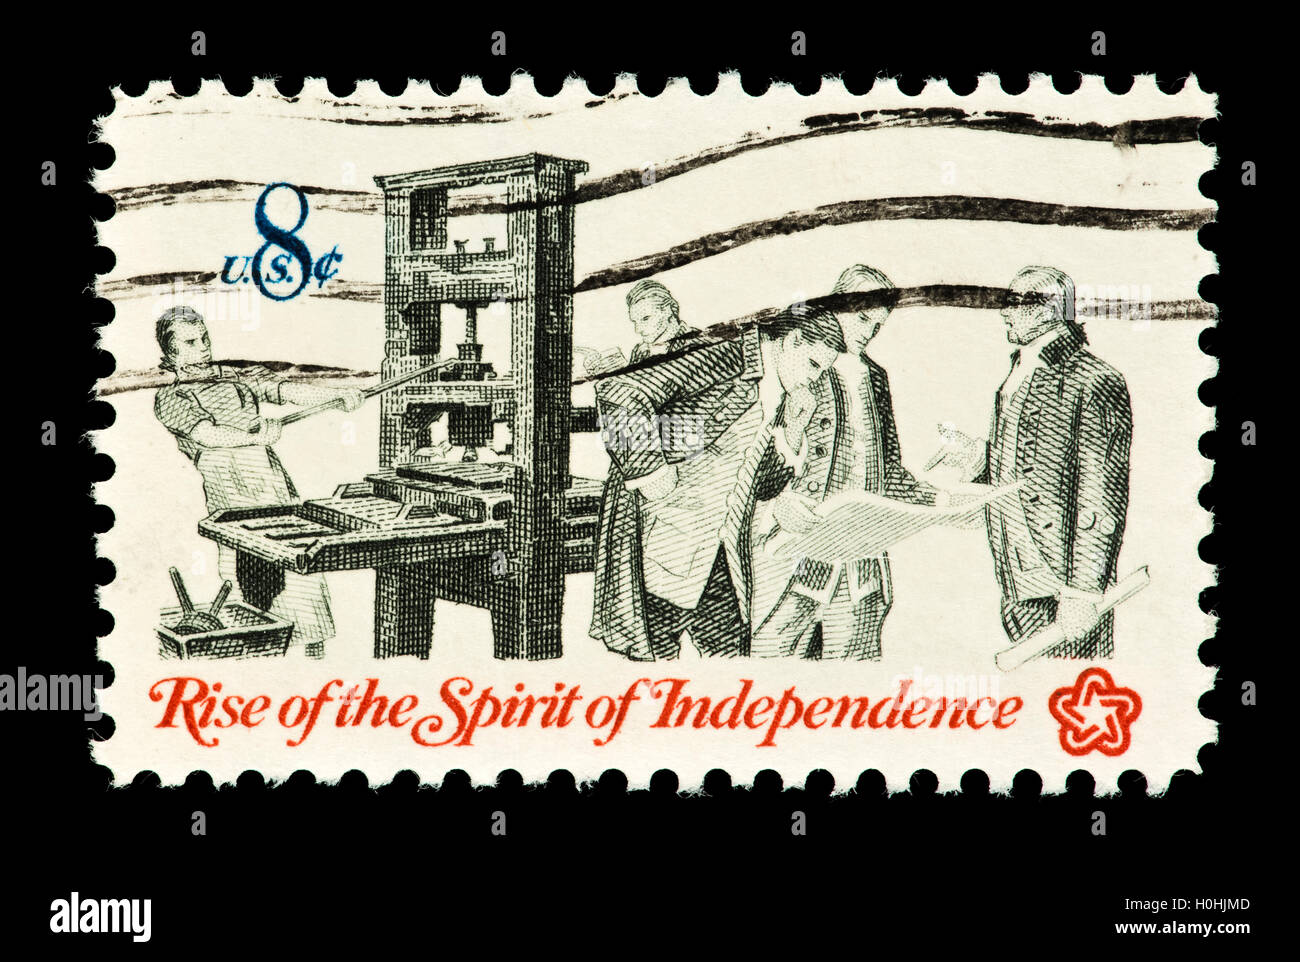 Postage stamp from the United States depicting a printing press and patriots, issued for the American Revolution bicentennial. Stock Photo